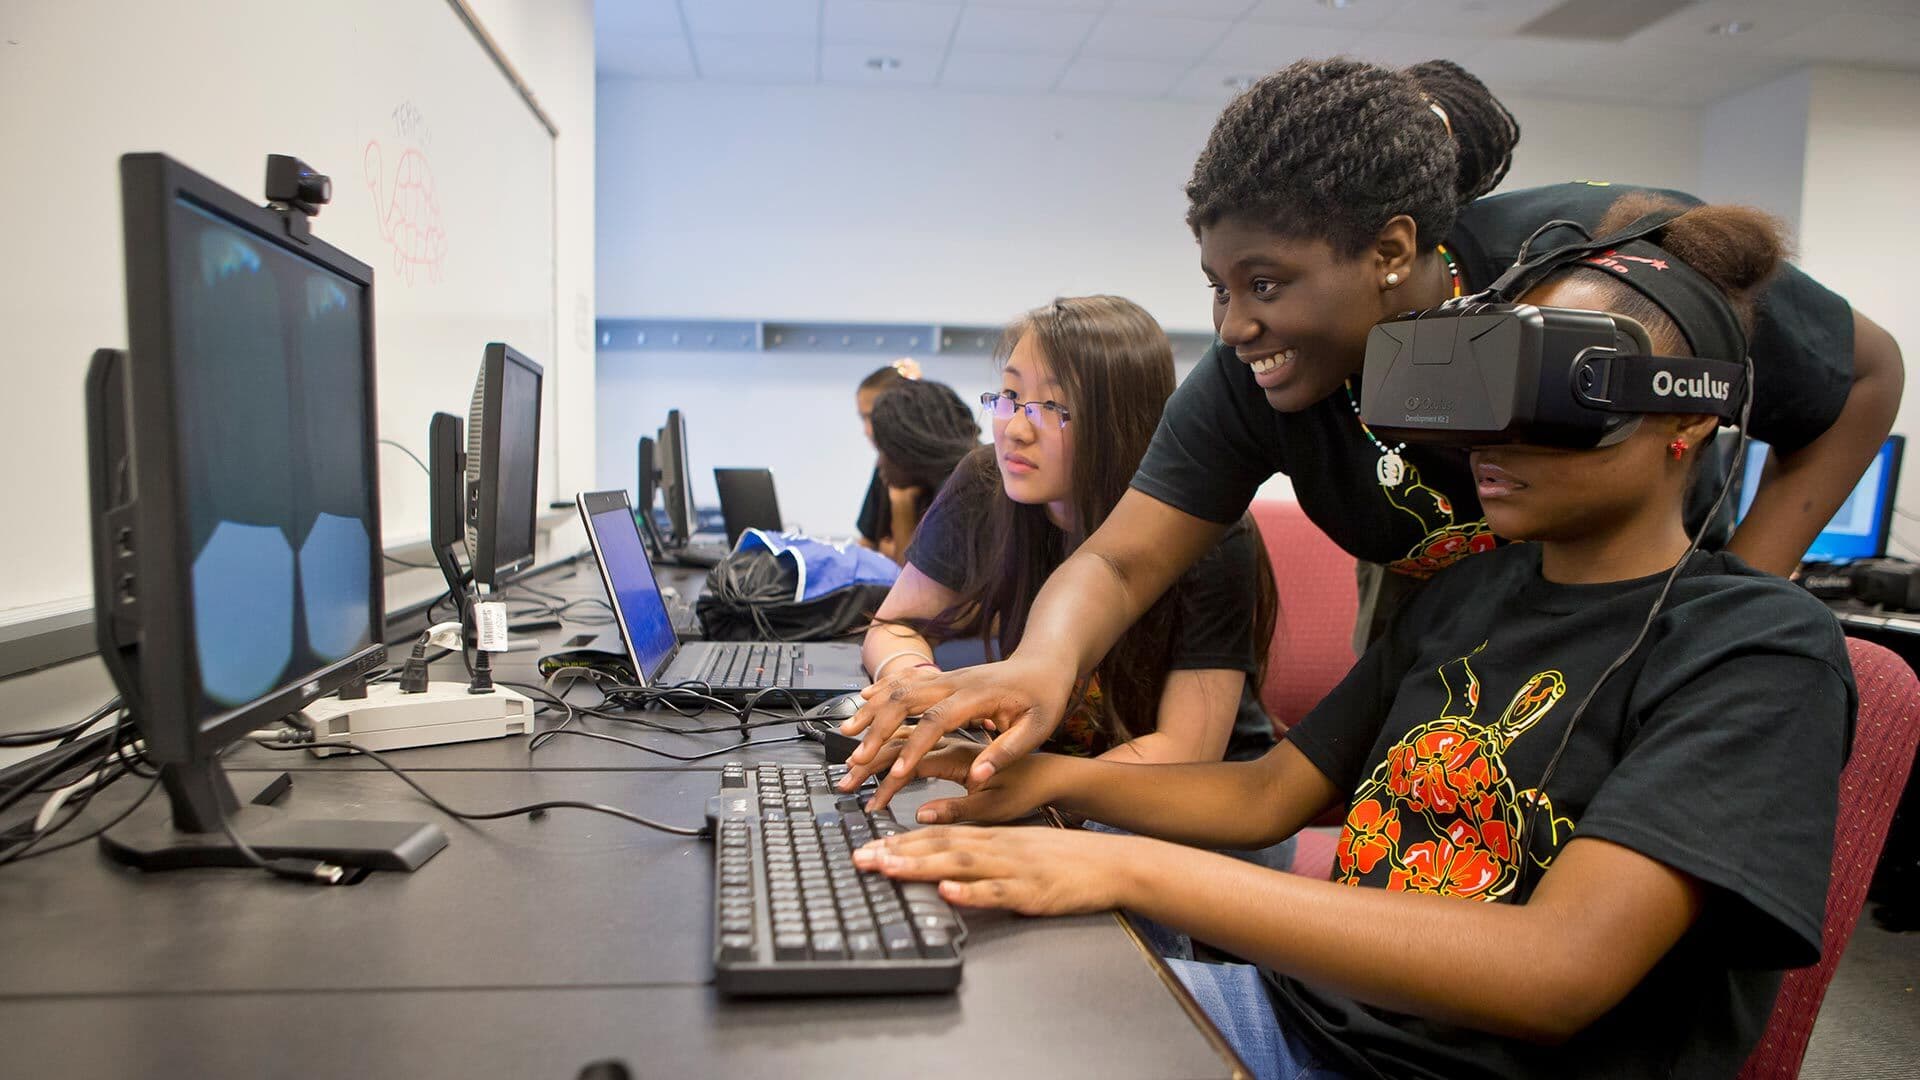 Students at computer with VR headset